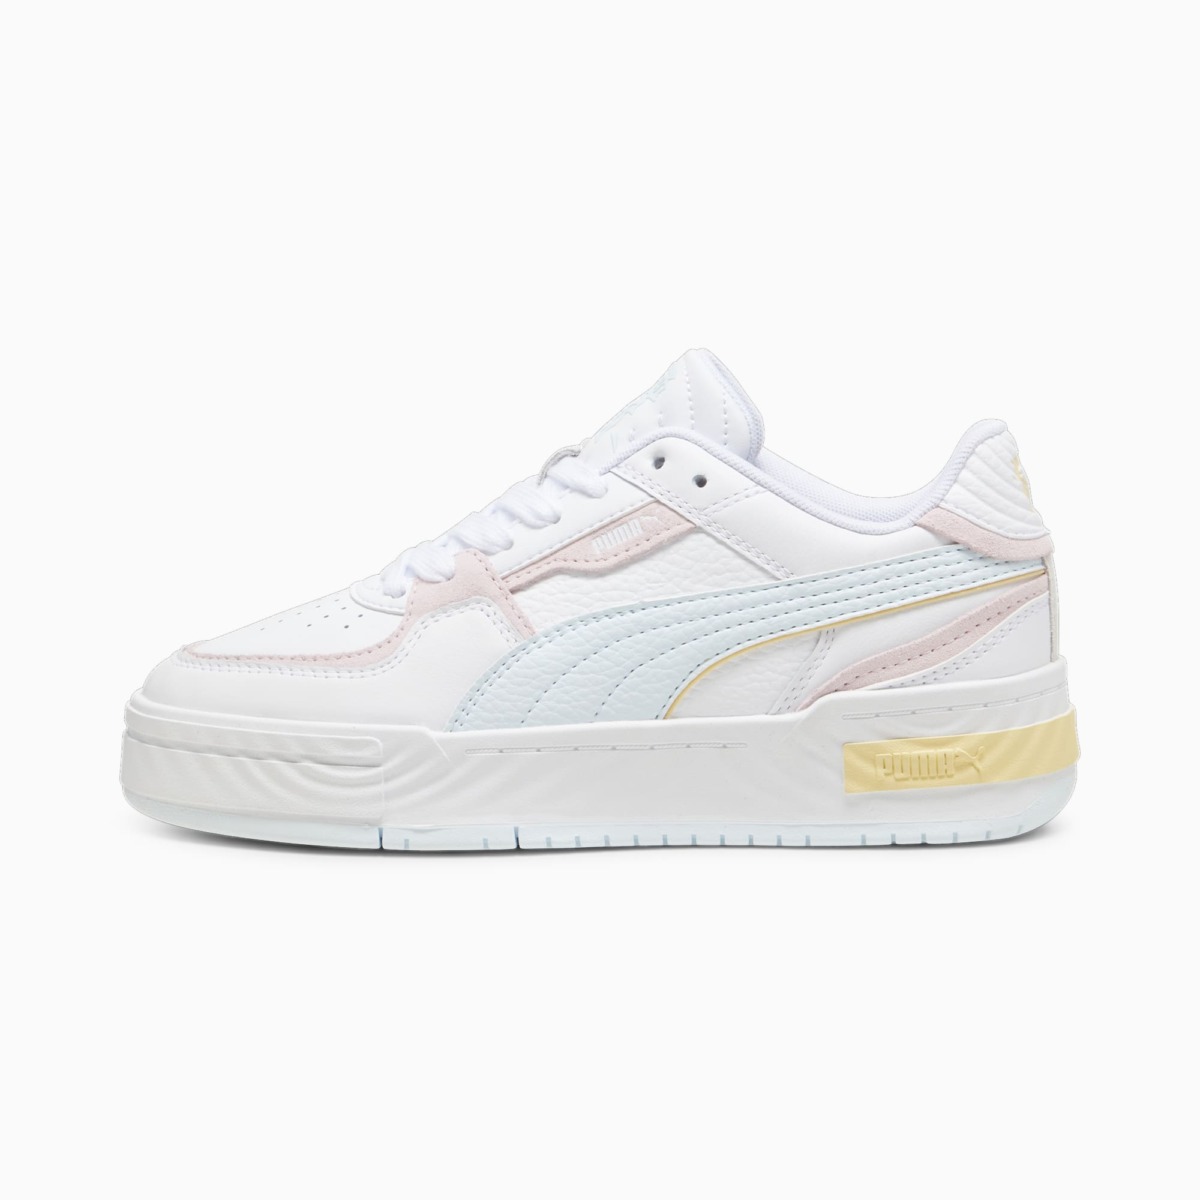 Puma Men's White Pink Approx Pro Ripple Earth Sneakers GOOFASH